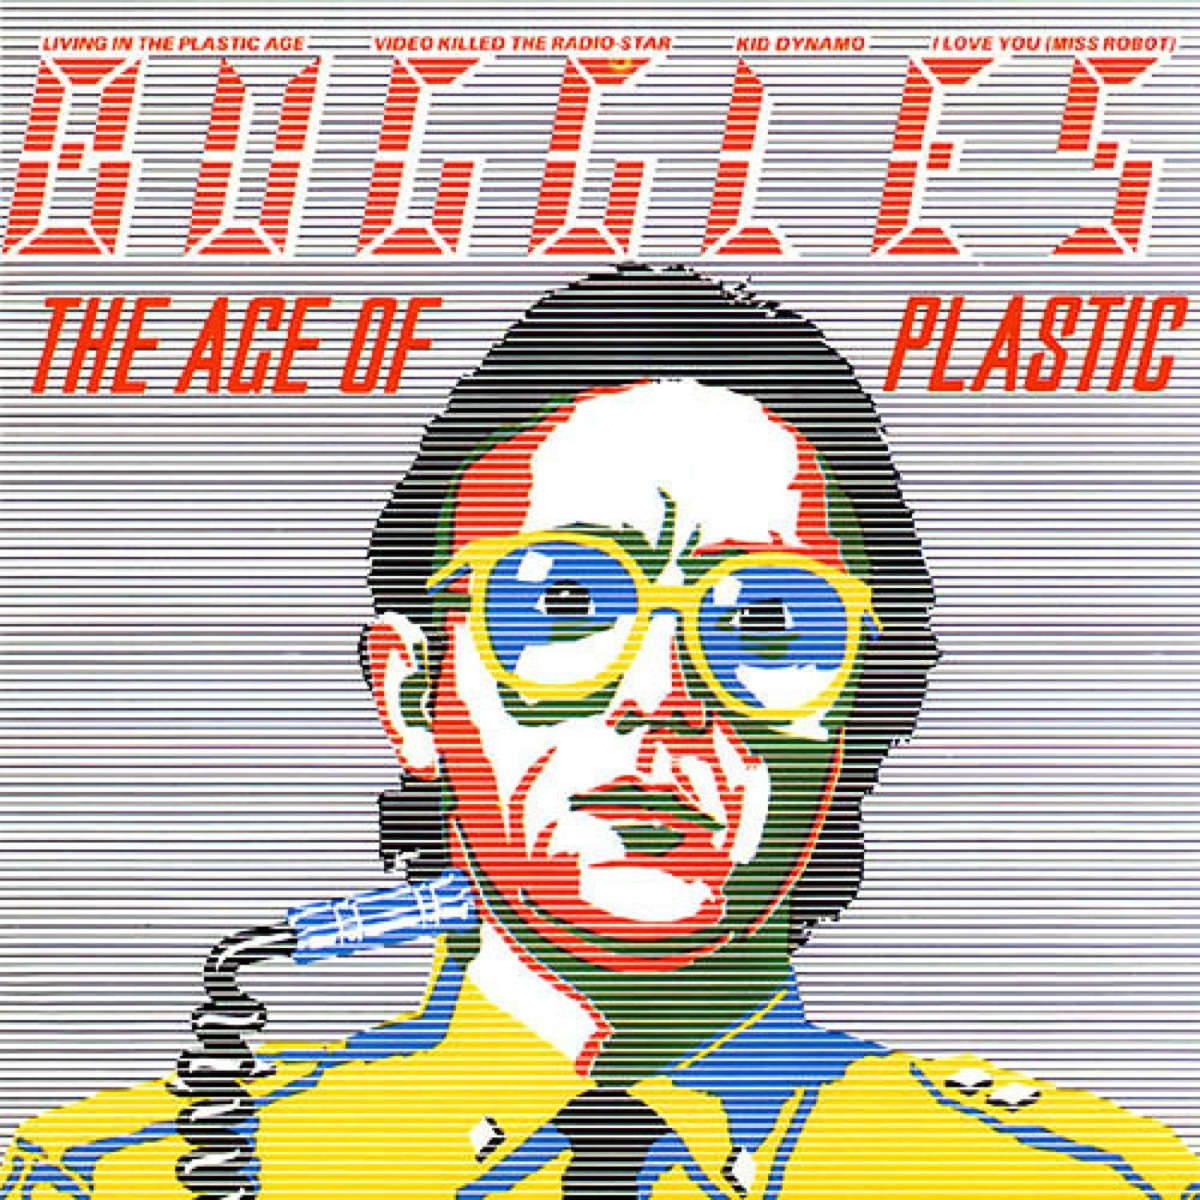 The Buggles Video Killed The Radio Star 1980s one-hit wonders